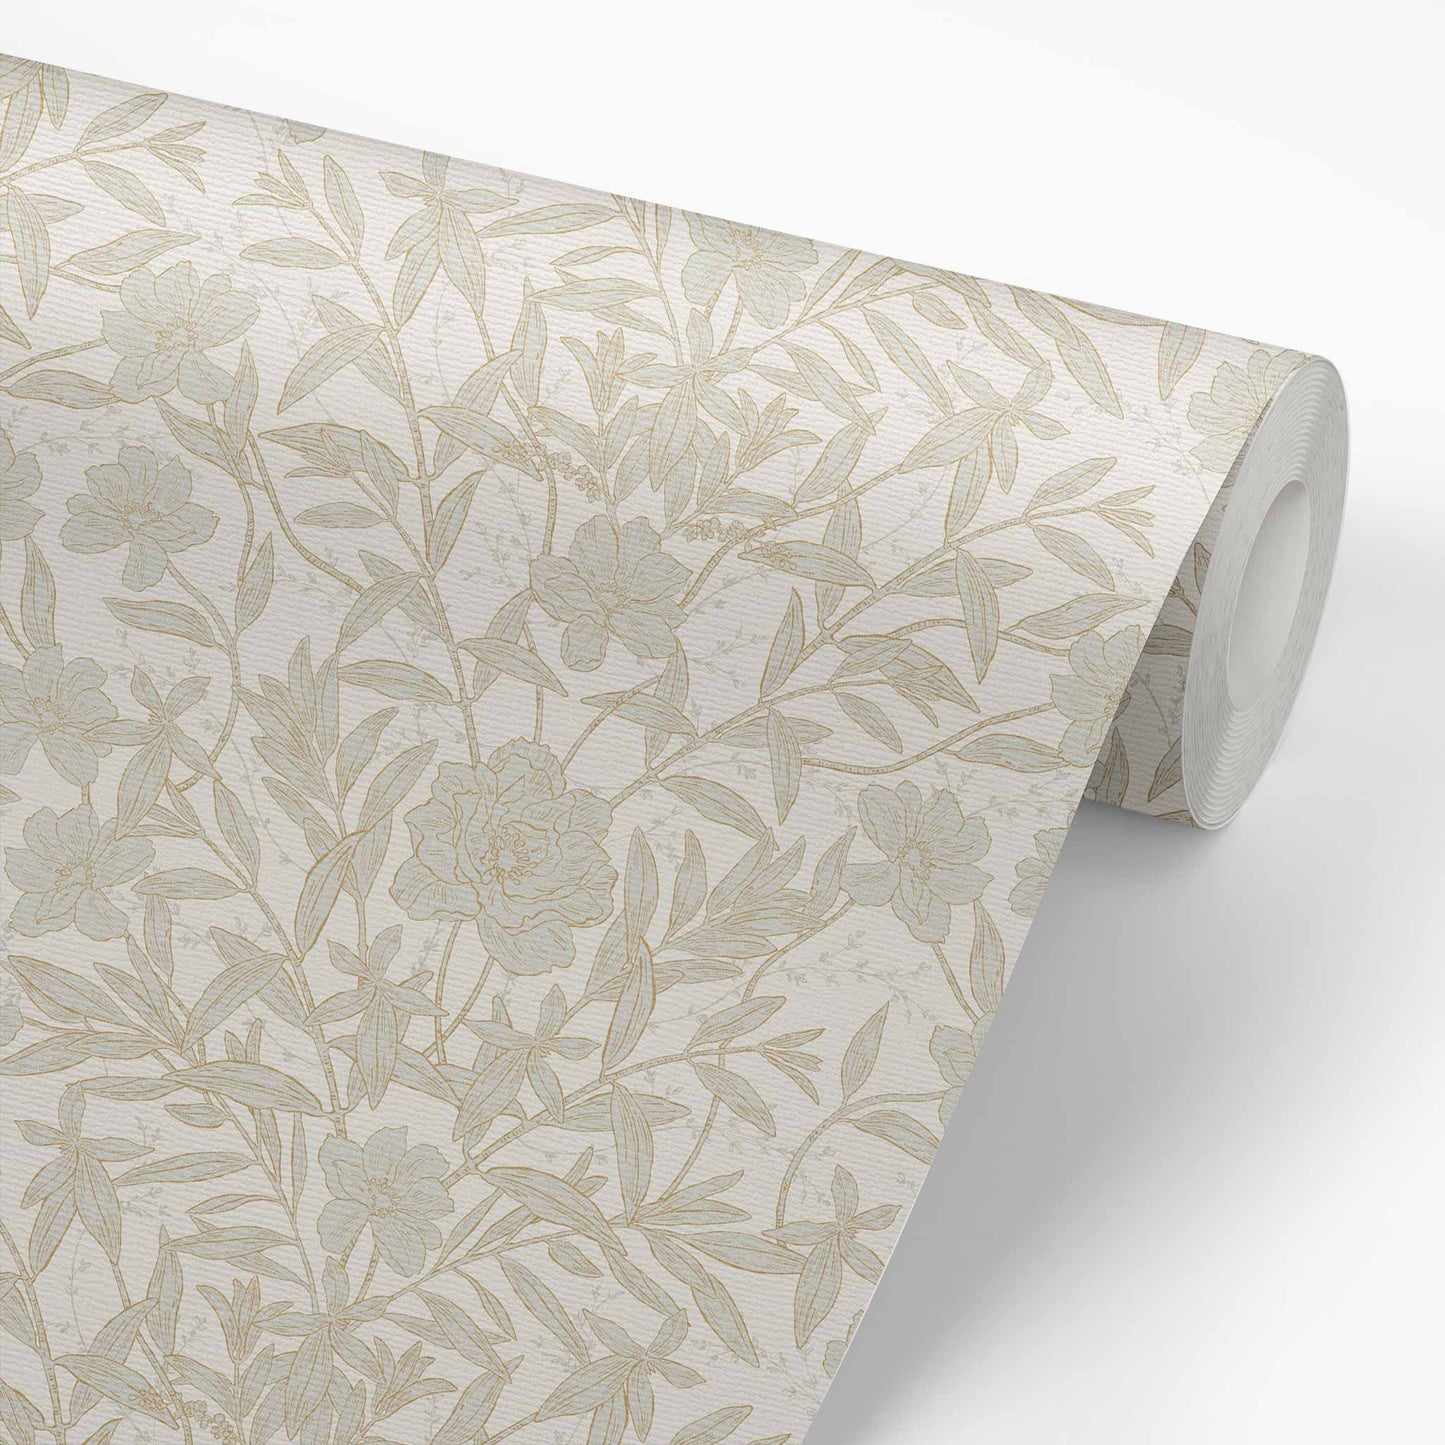 Our luxurious Peony Garden Wallpaper in Cream adds a majestic touch of sophistication to any space. Its distinctive classic peonies are guaranteed to add a sense of elegance to any wall. 